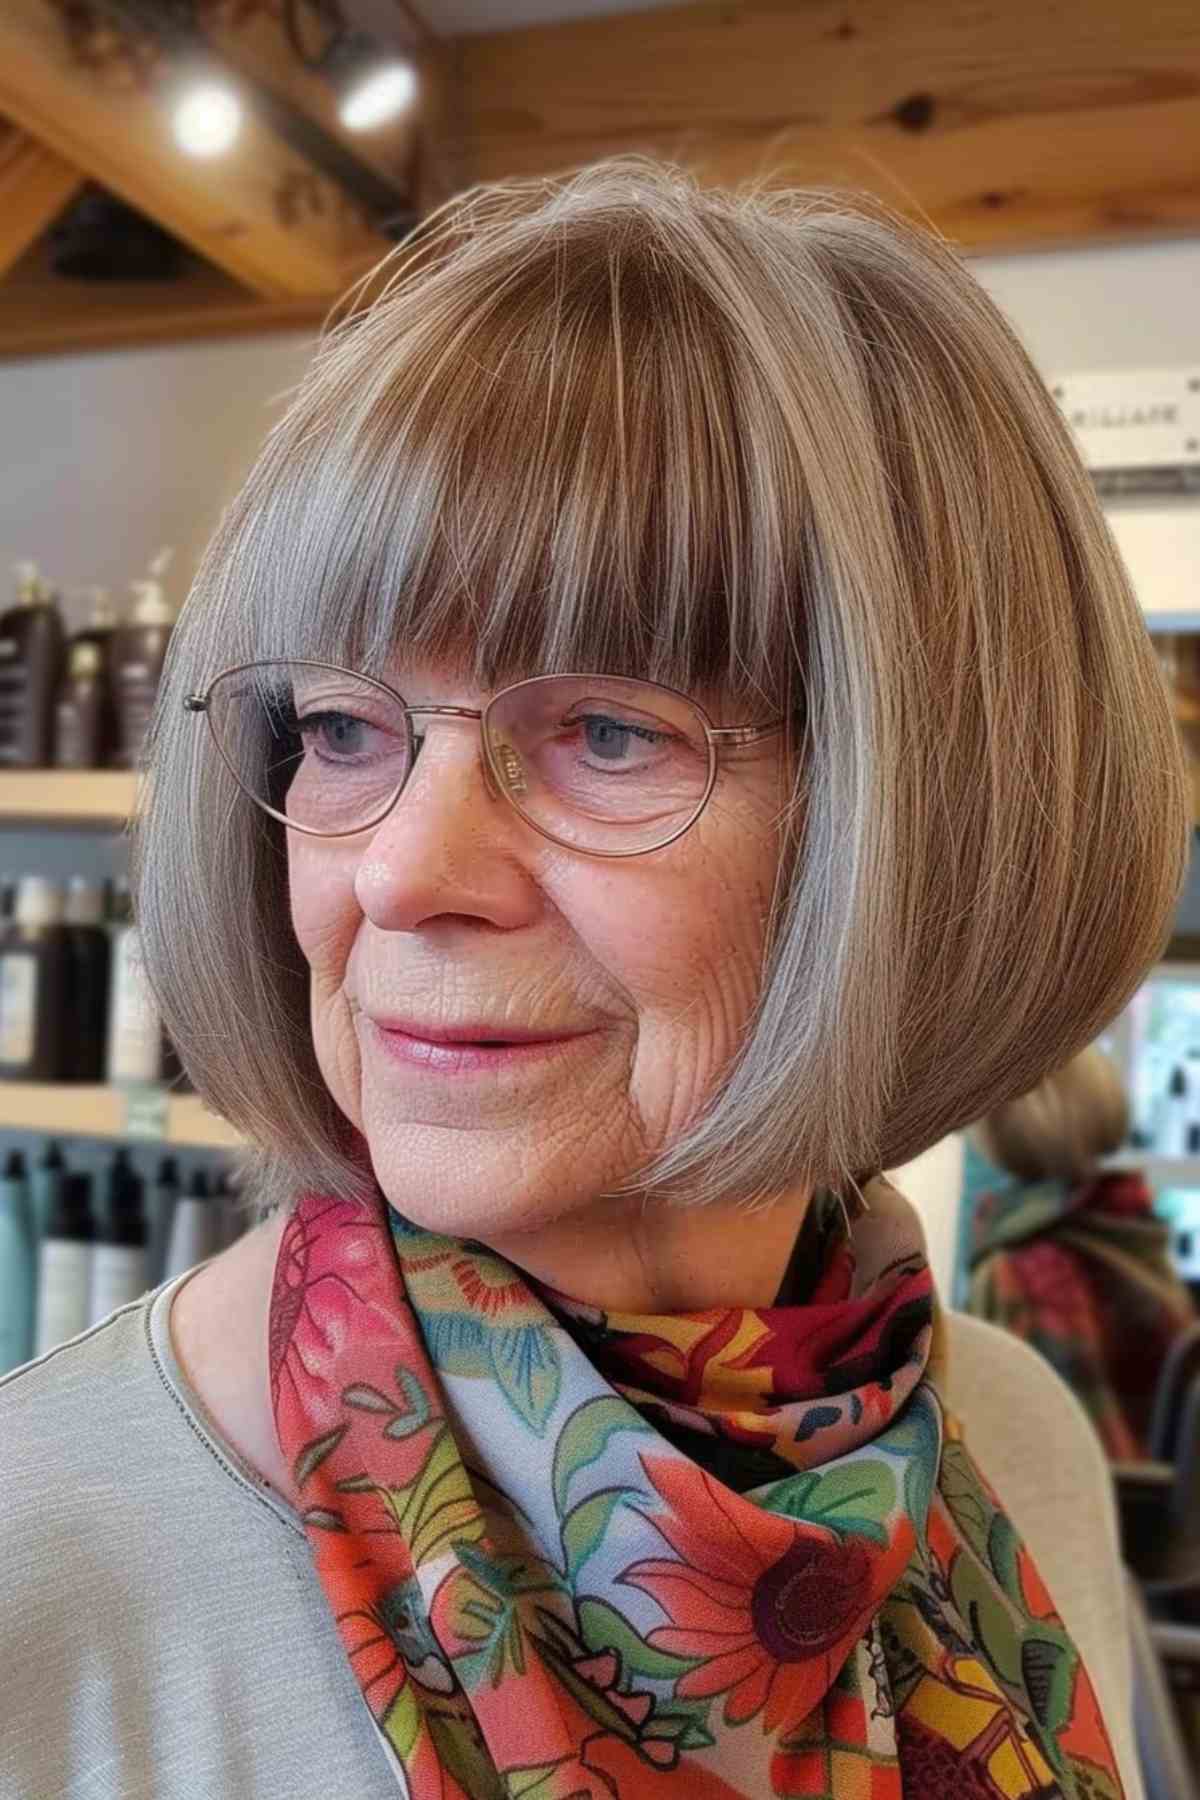 Mature woman with a classic bob haircut featuring full, straight bangs, wearing glasses and a floral scarf.